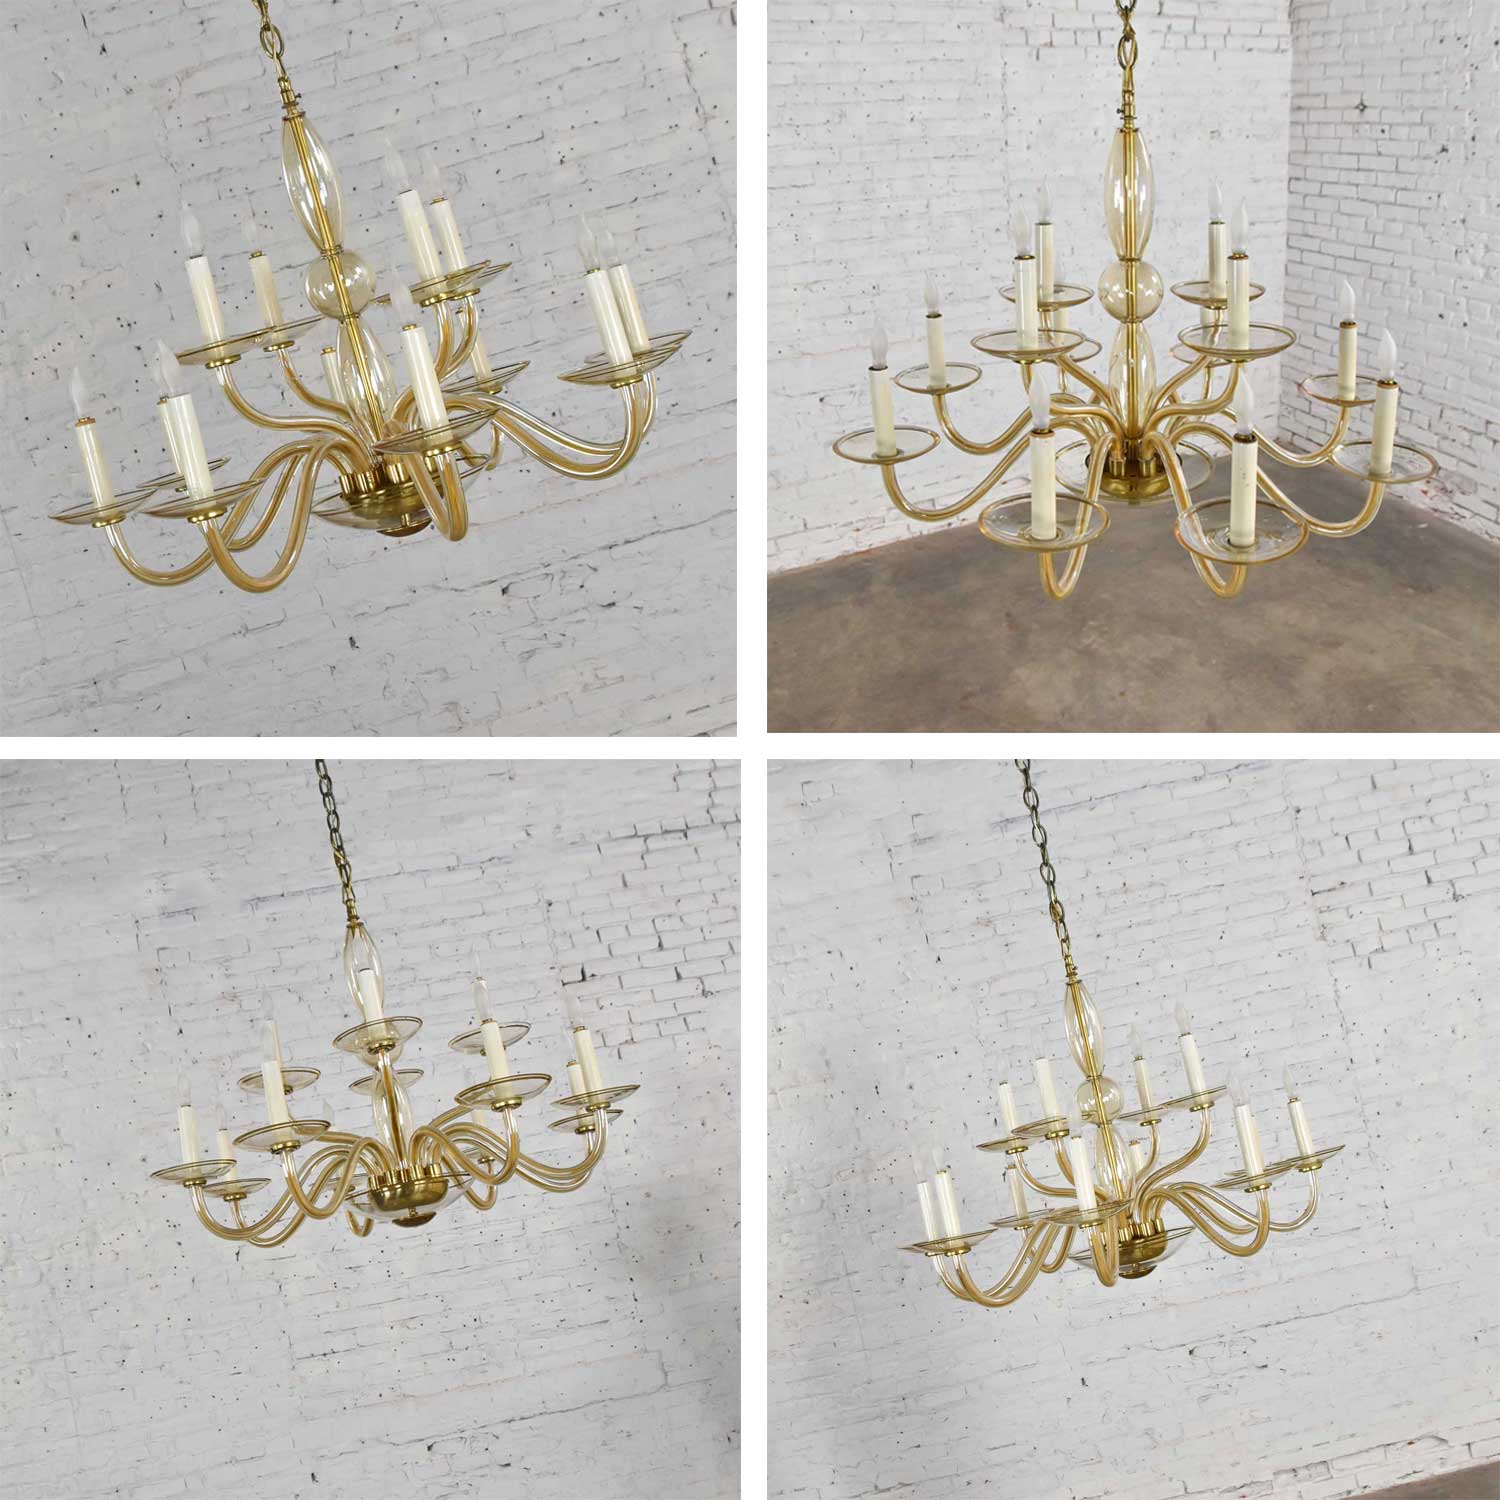 Czech Bohemian Blown Glass and Brass 12 Arm Chandelier & 3 Wall Sconces Mid 20th Century